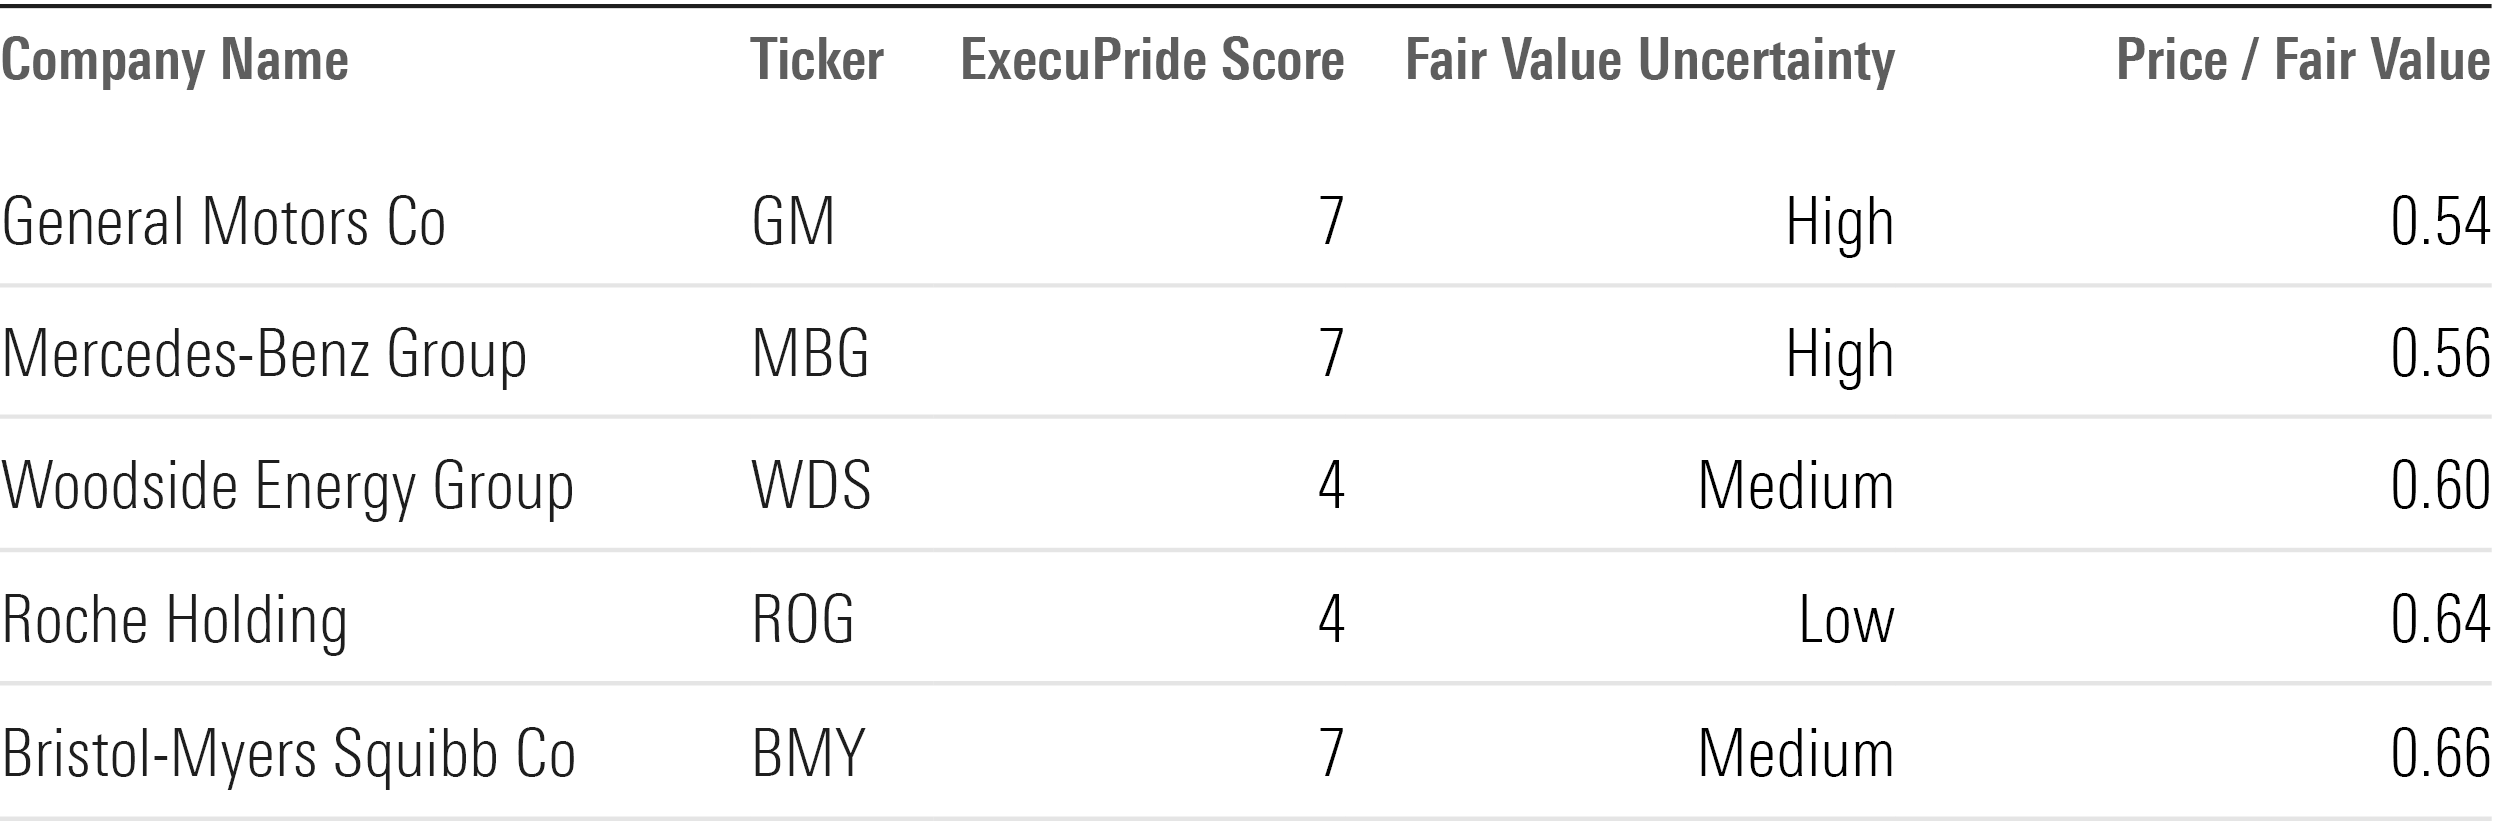 A table showing the five best value constituents of the Morningstar Developed Markets LGBTQ+ Leaders Index based on price/fair value.